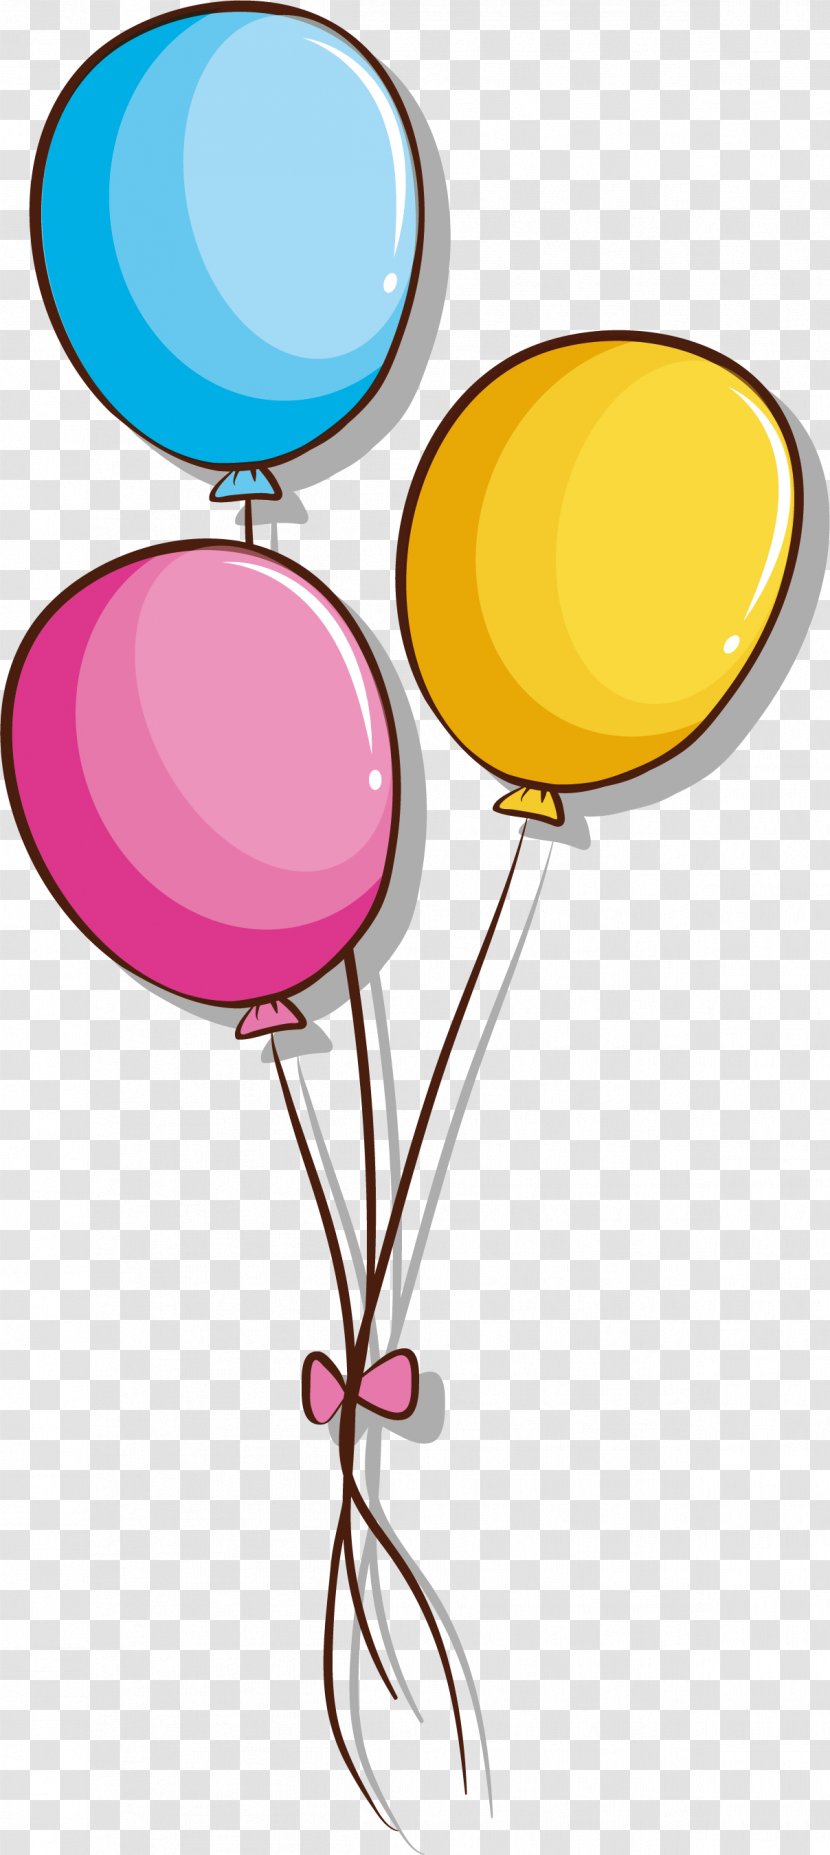 Drawing Toy Balloon Illustration - A Bunch Of Colored Balloons Transparent PNG